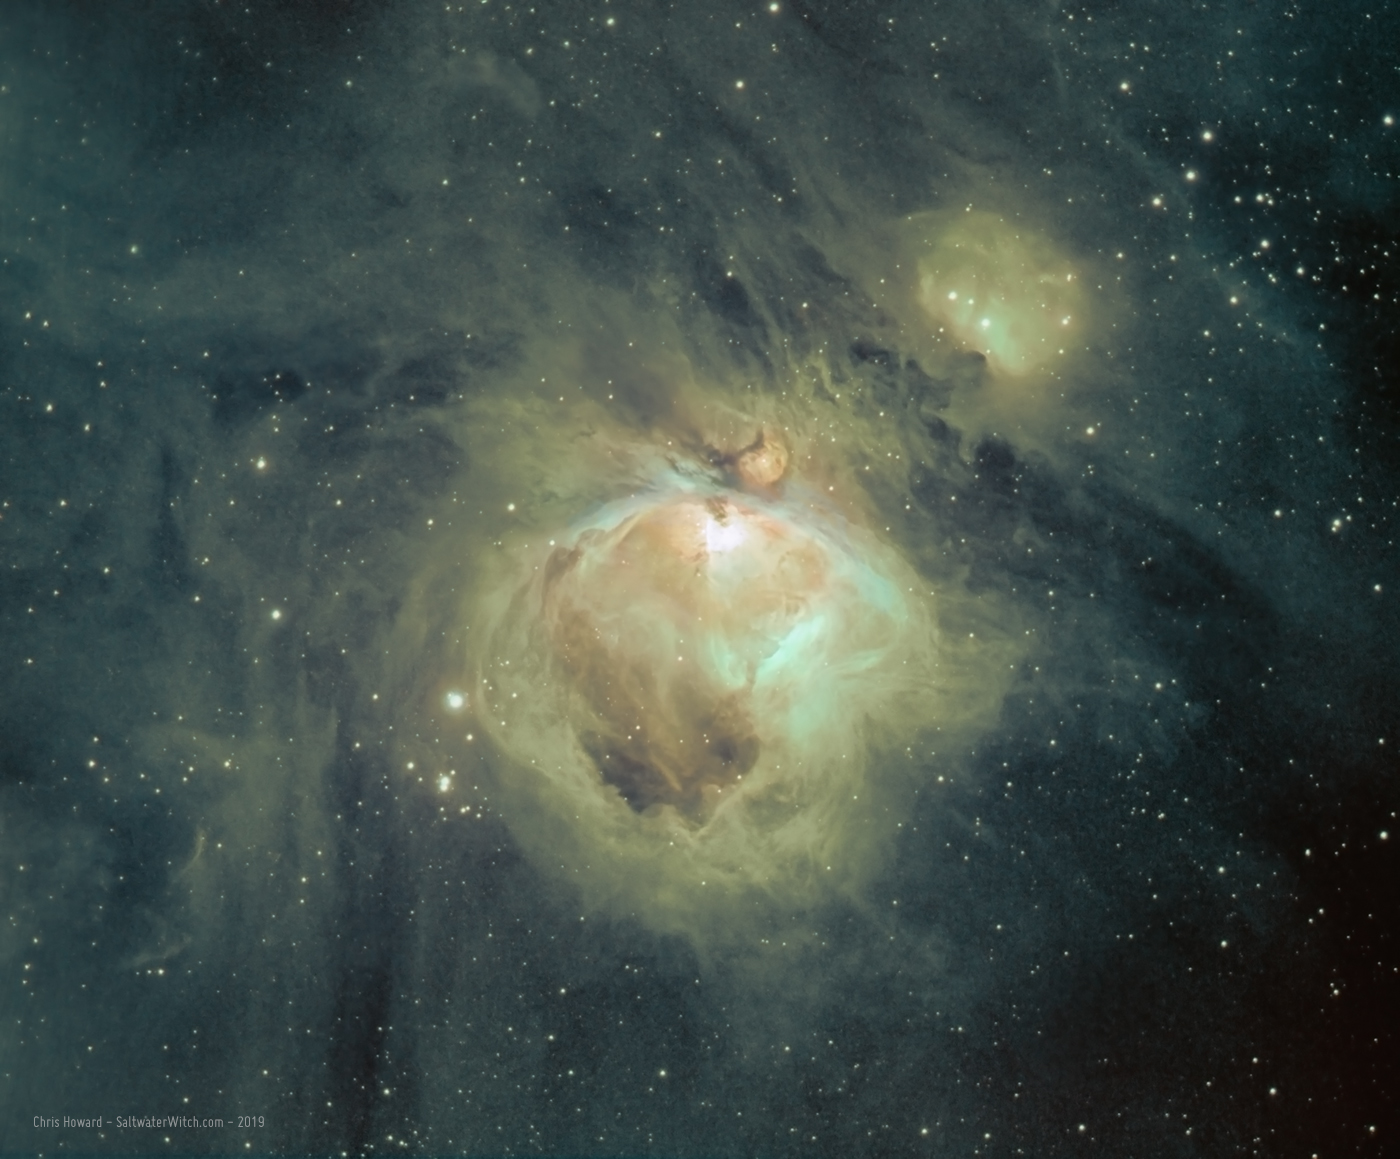 Orion Nebula (M42) in the SHO Hubble Palette | SALTWATER WITCH ASTRONOMY